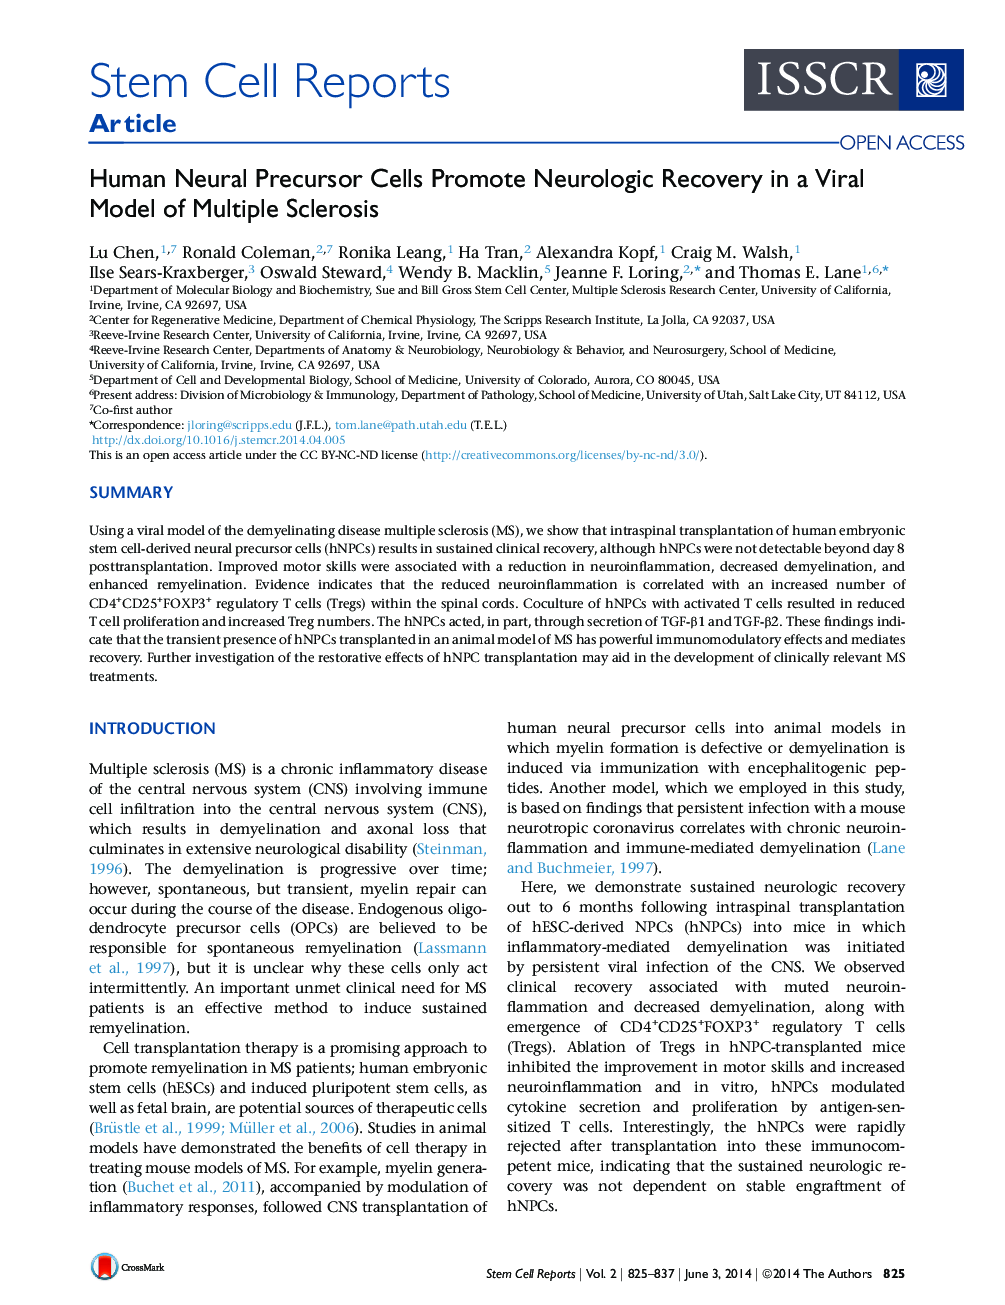 Human Neural Precursor Cells Promote Neurologic Recovery in a Viral Model of Multiple Sclerosis 